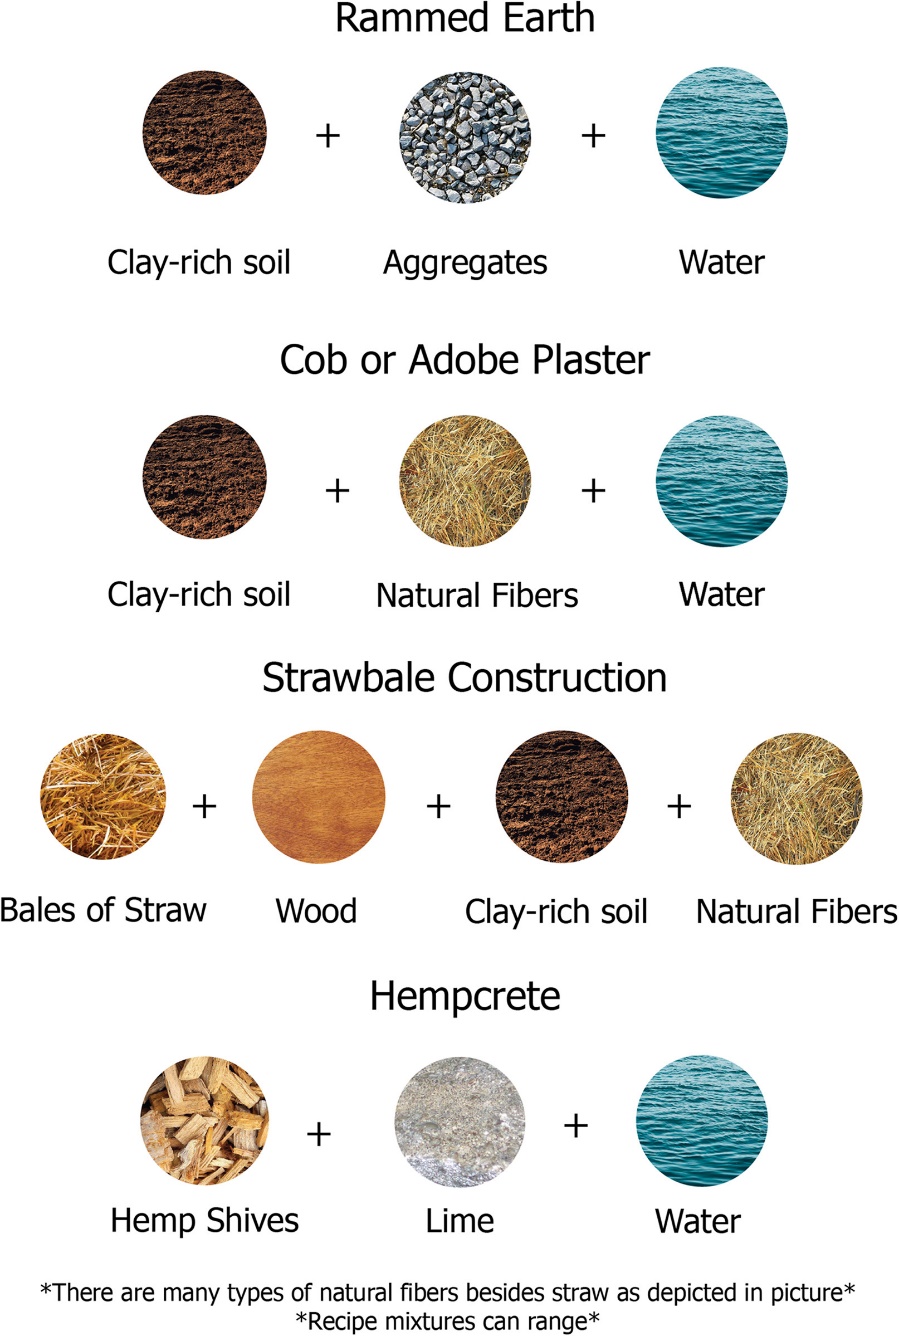 Figure 5: Compositions of different natural materials used in raw earth-based methods